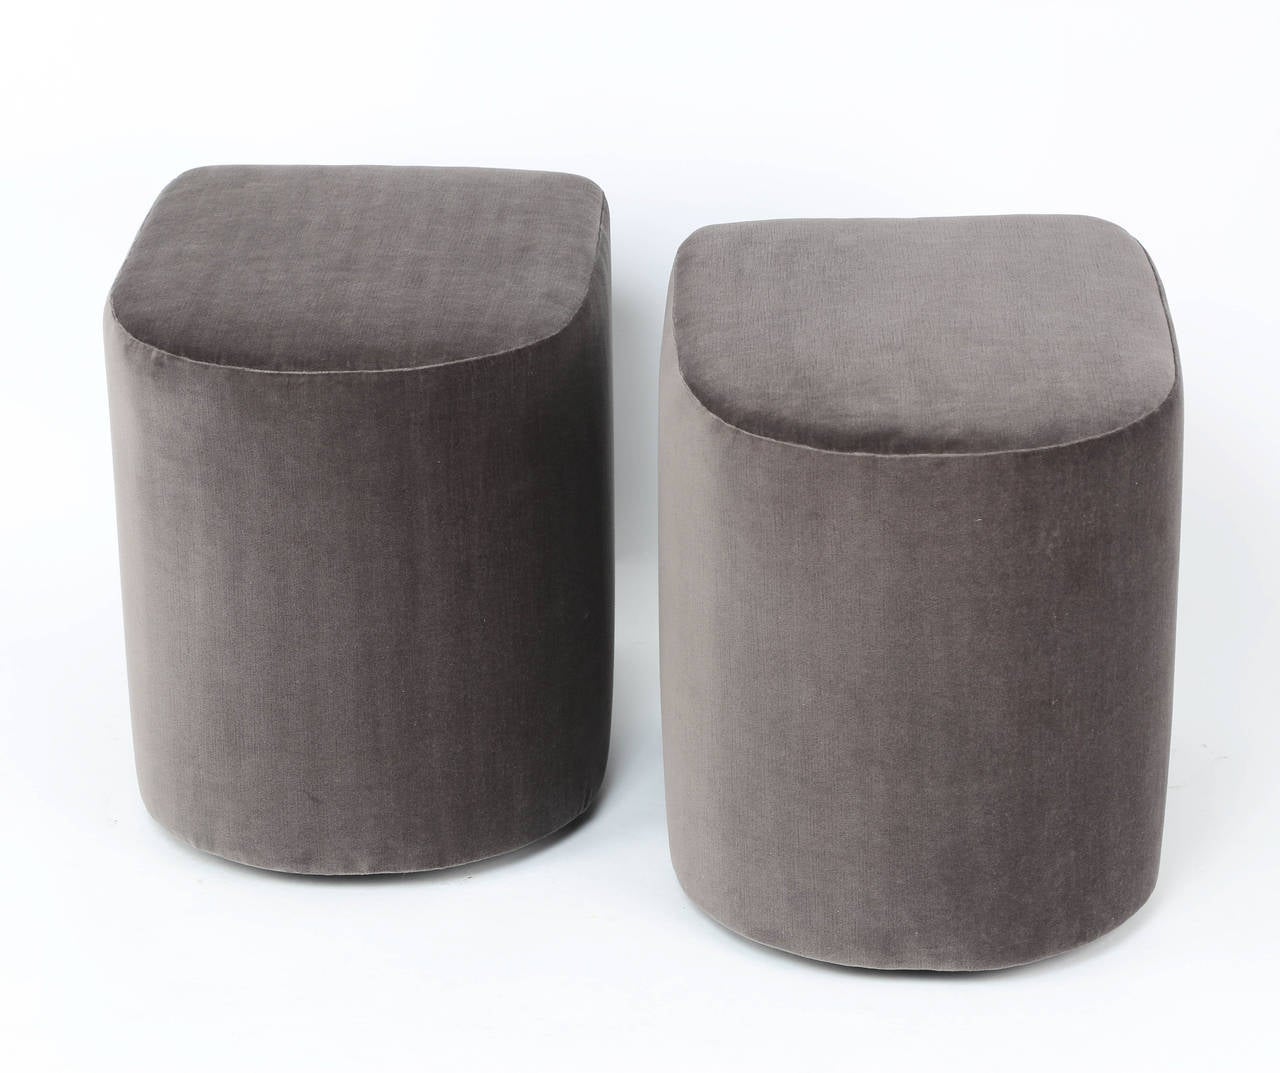 Unusual, rounded 1980s stools on recessed casters. Newly reupholstered in smokey-gray cotton velvet. Signed "Milo Baughman" with original tags. Fabric swatch available. These stools are at the 1stdibs Gallery at the New York Design Center,